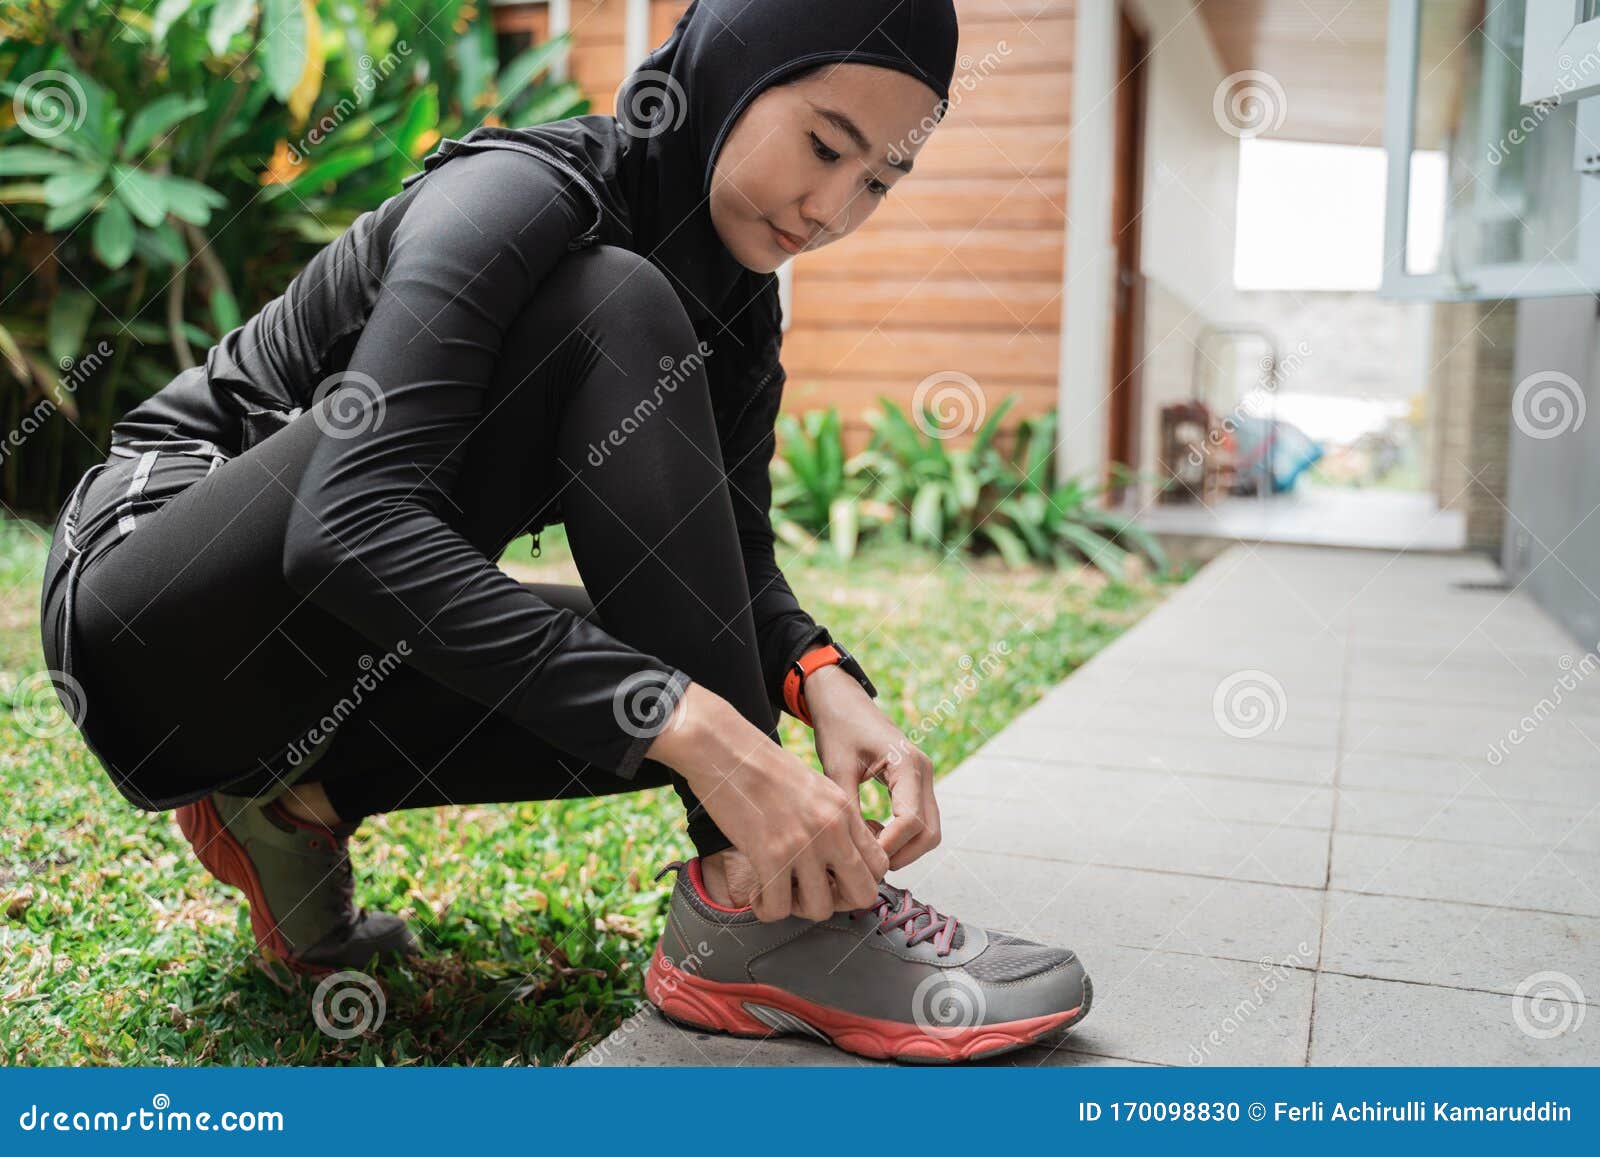 Update more than 91 hijab with sneakers super hot